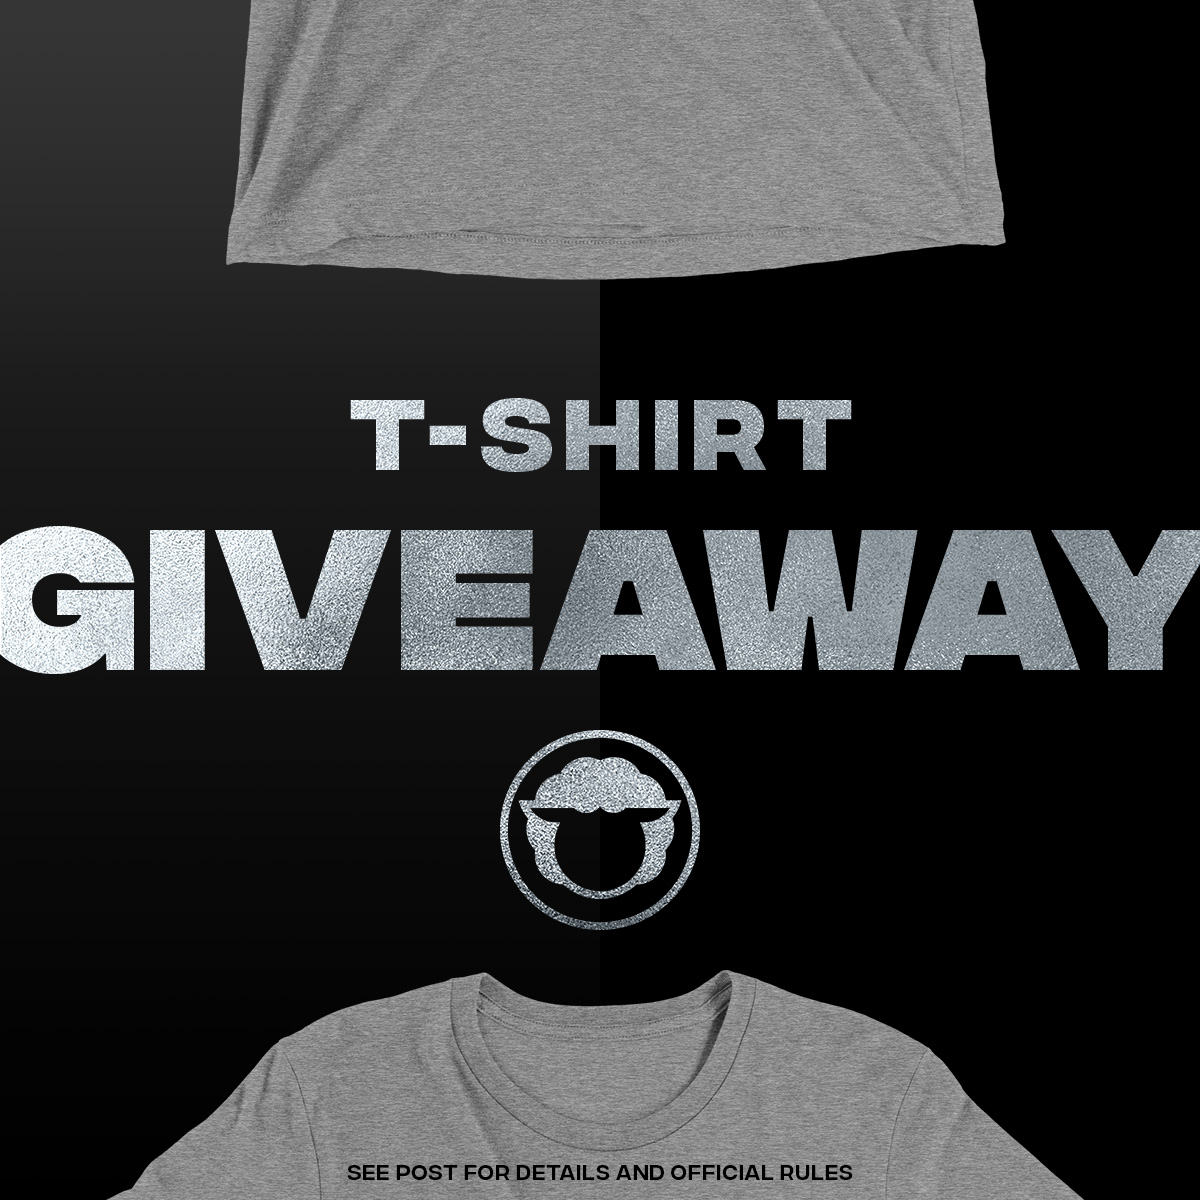 🎁👕 T-SHIRT GIVEAWAY! 👕🎁

Two followers who share their favorite LLSC design will win a t-shirt of their choice.

To enter: 1. Follow us! 2. Tweet a link to your favorite design on lillambstyle.com; tag us and include #giveaway.

Official rules: lillambstyle.com/pages/x-twitte…